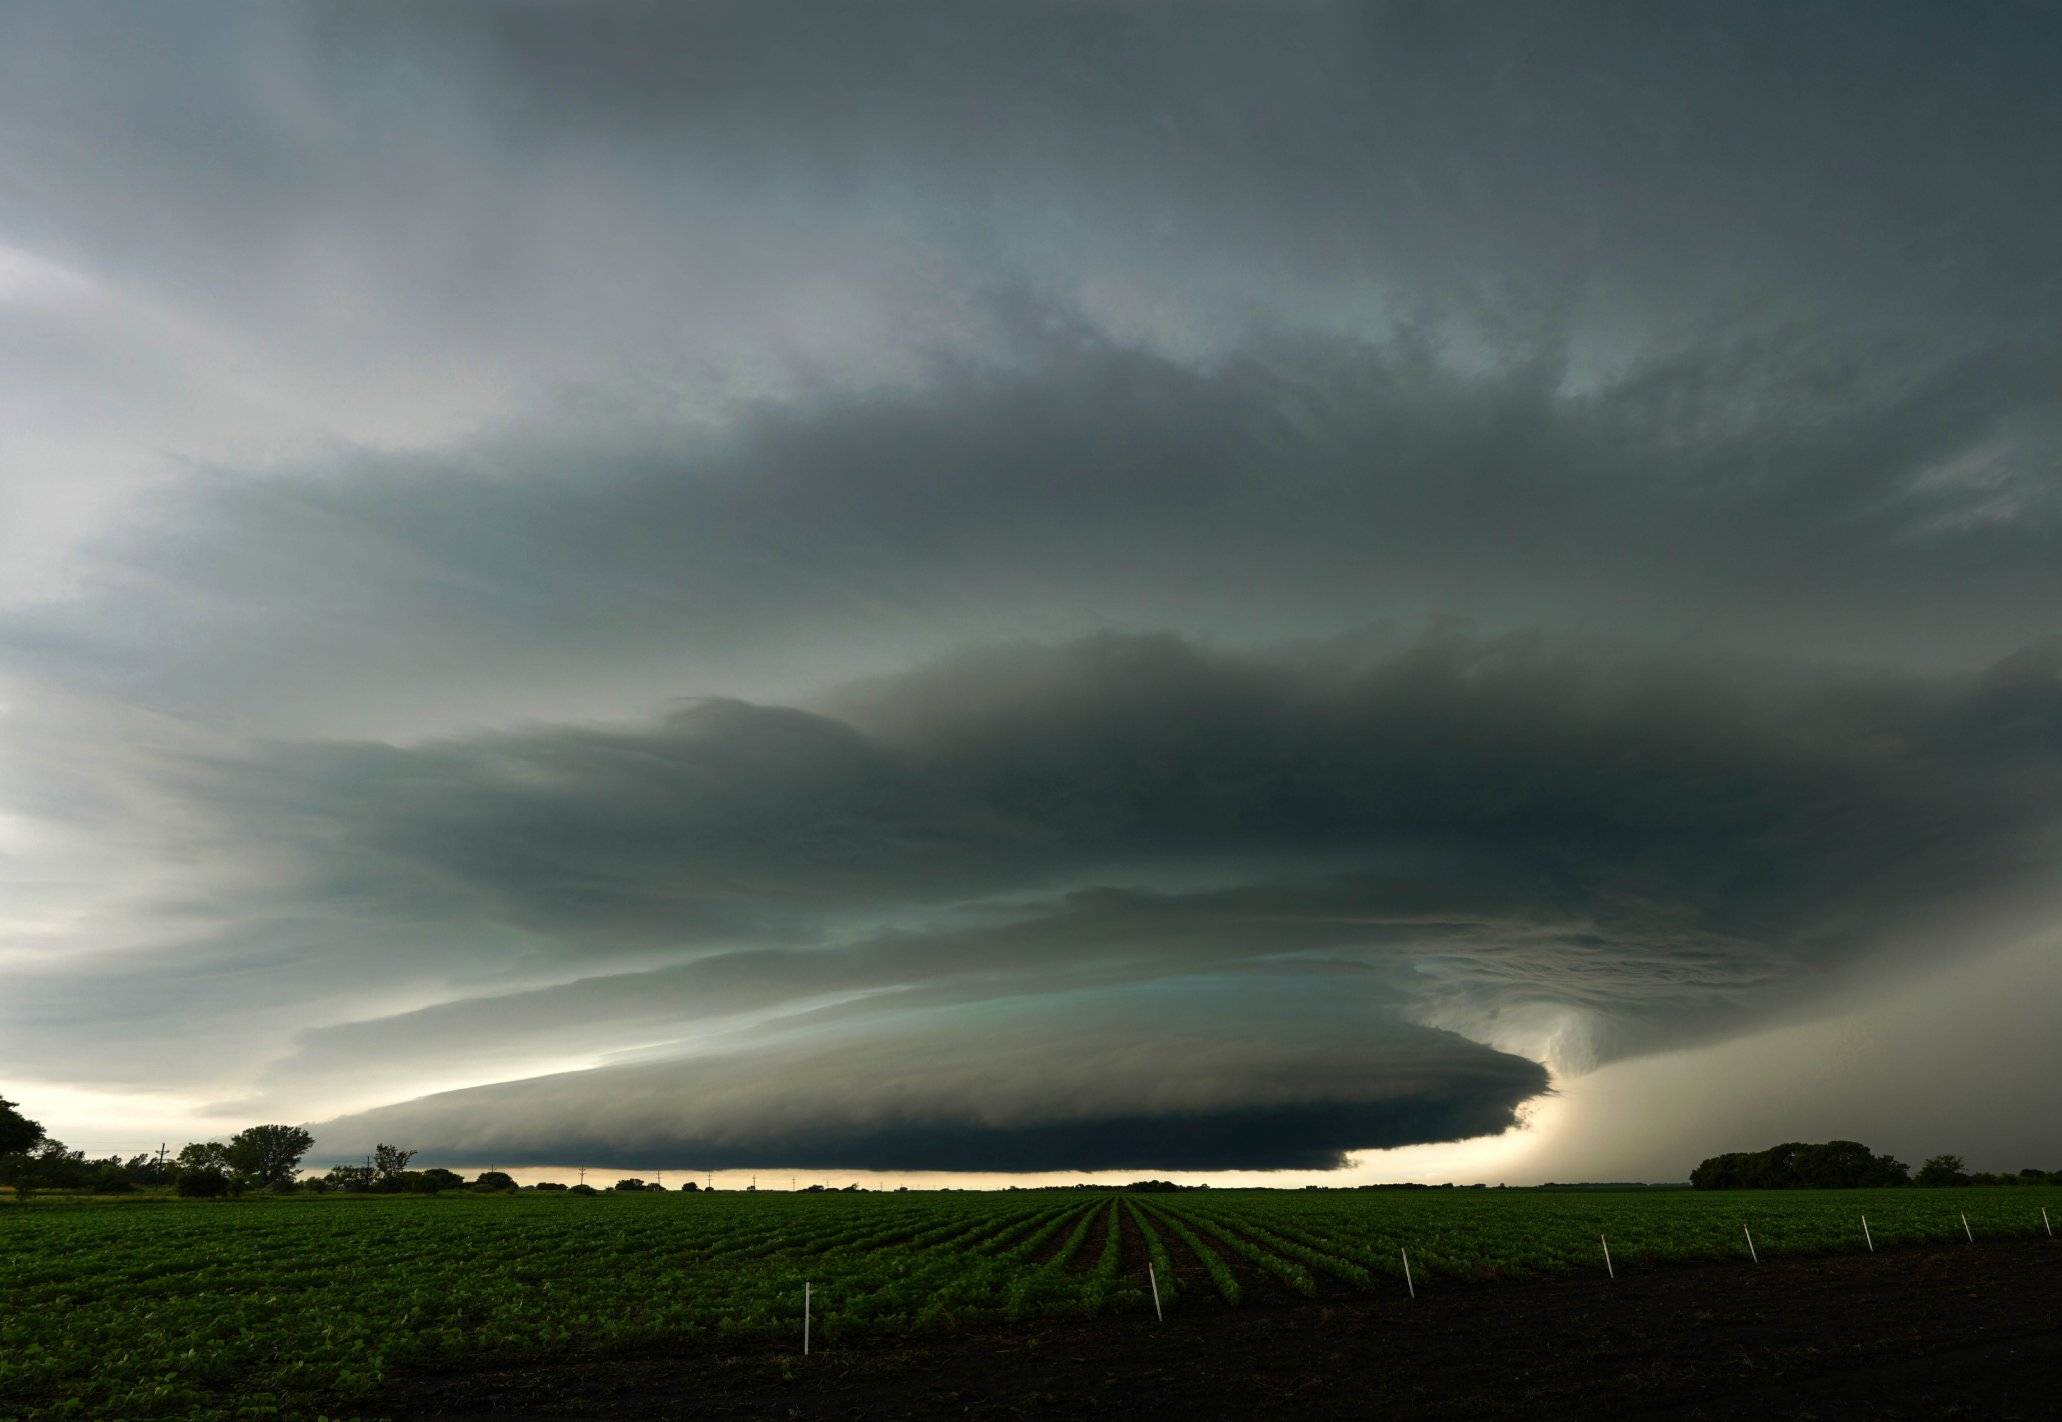 Morning convection turned out to be the show of the day near Graceville, Minnesota by Jason Bednar @JasonBednar1